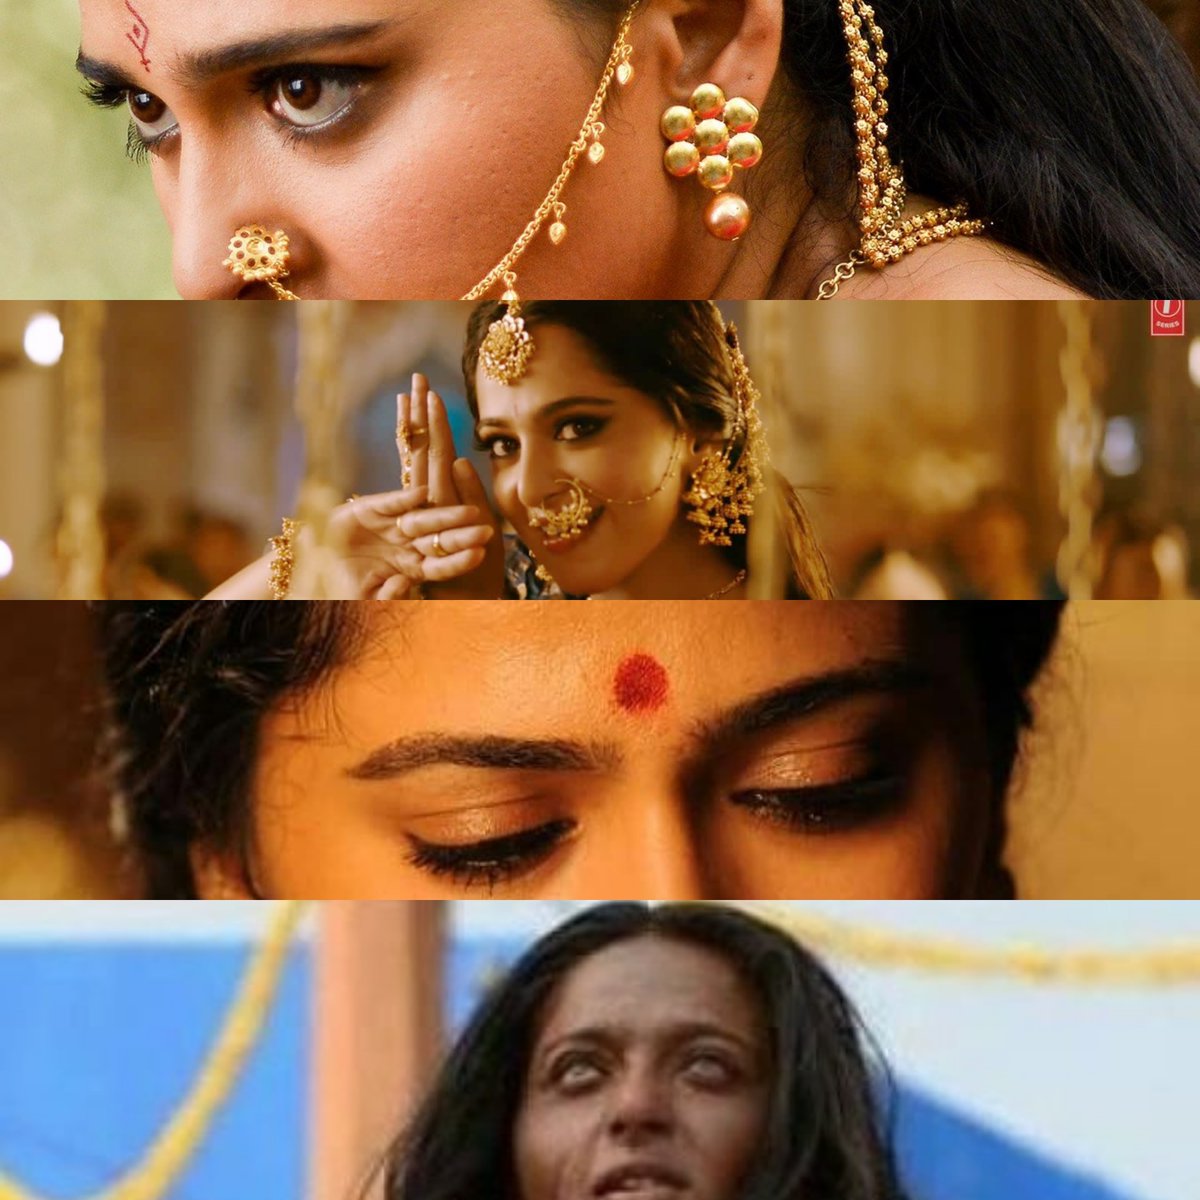 Shades of Devasena: She was a warrior Princess who fell in love,lost her husband,parted from her baby and waited for years patiently to get justice. #AnushkaShetty #7YearsForBaahubali2